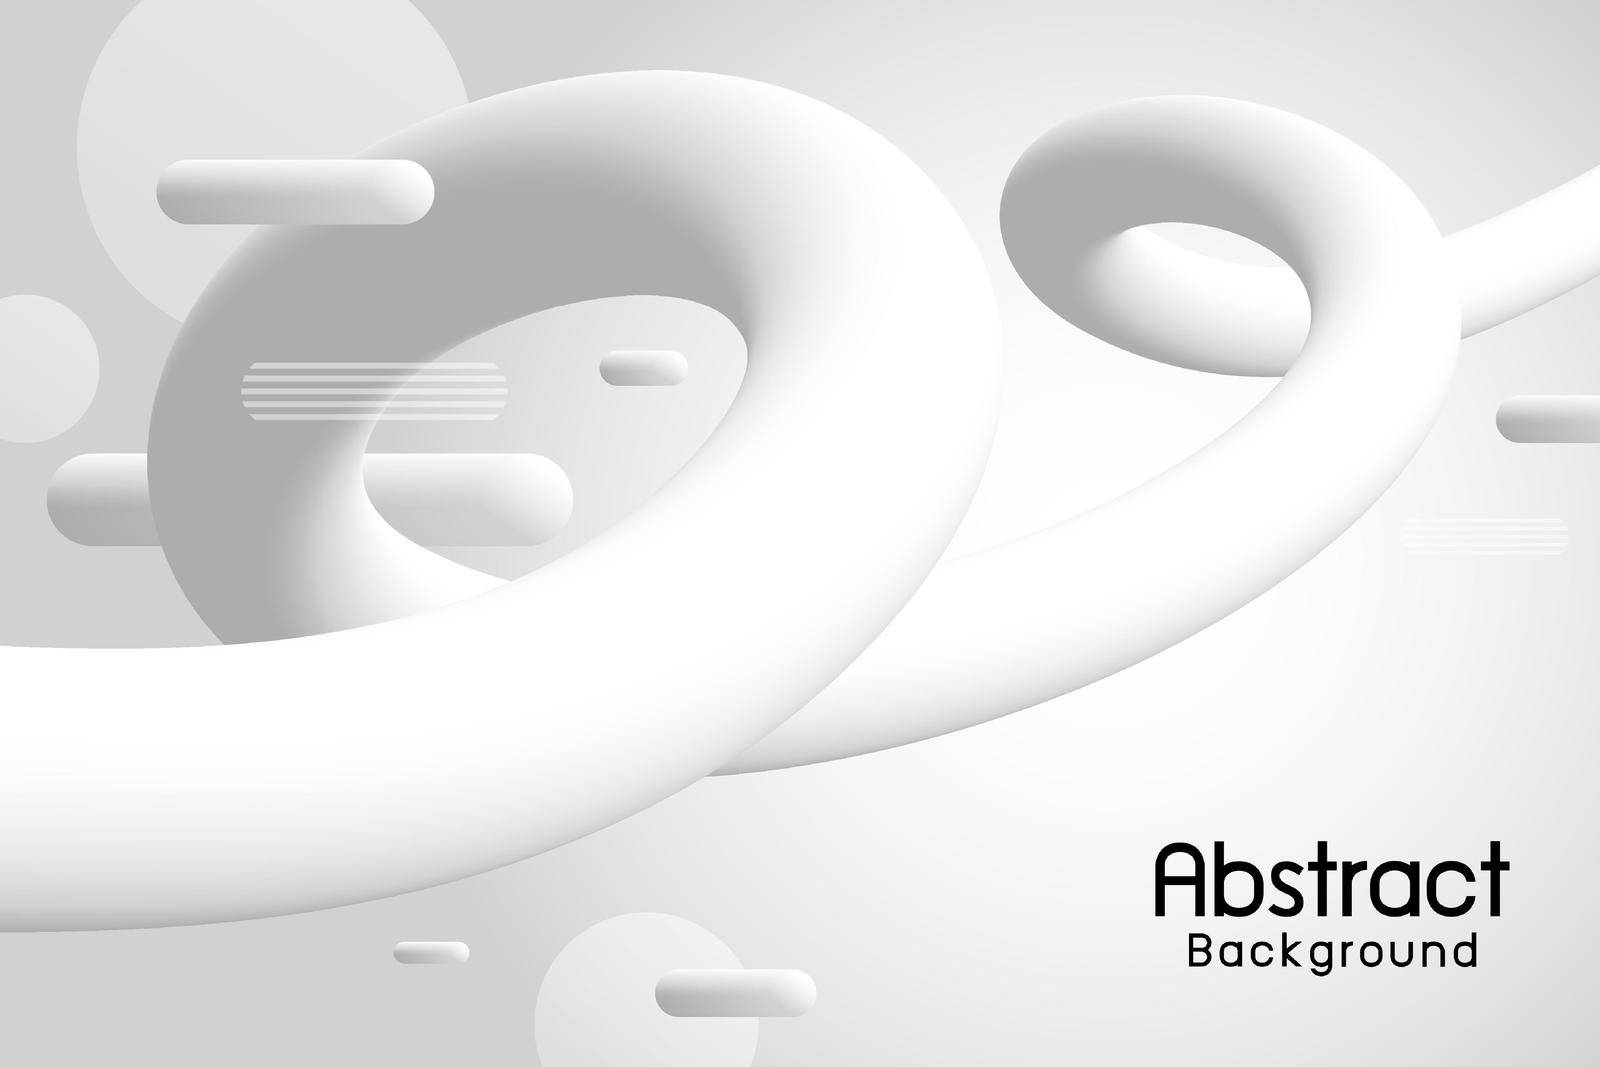 Abstract white fluid background design 3d vector illustration